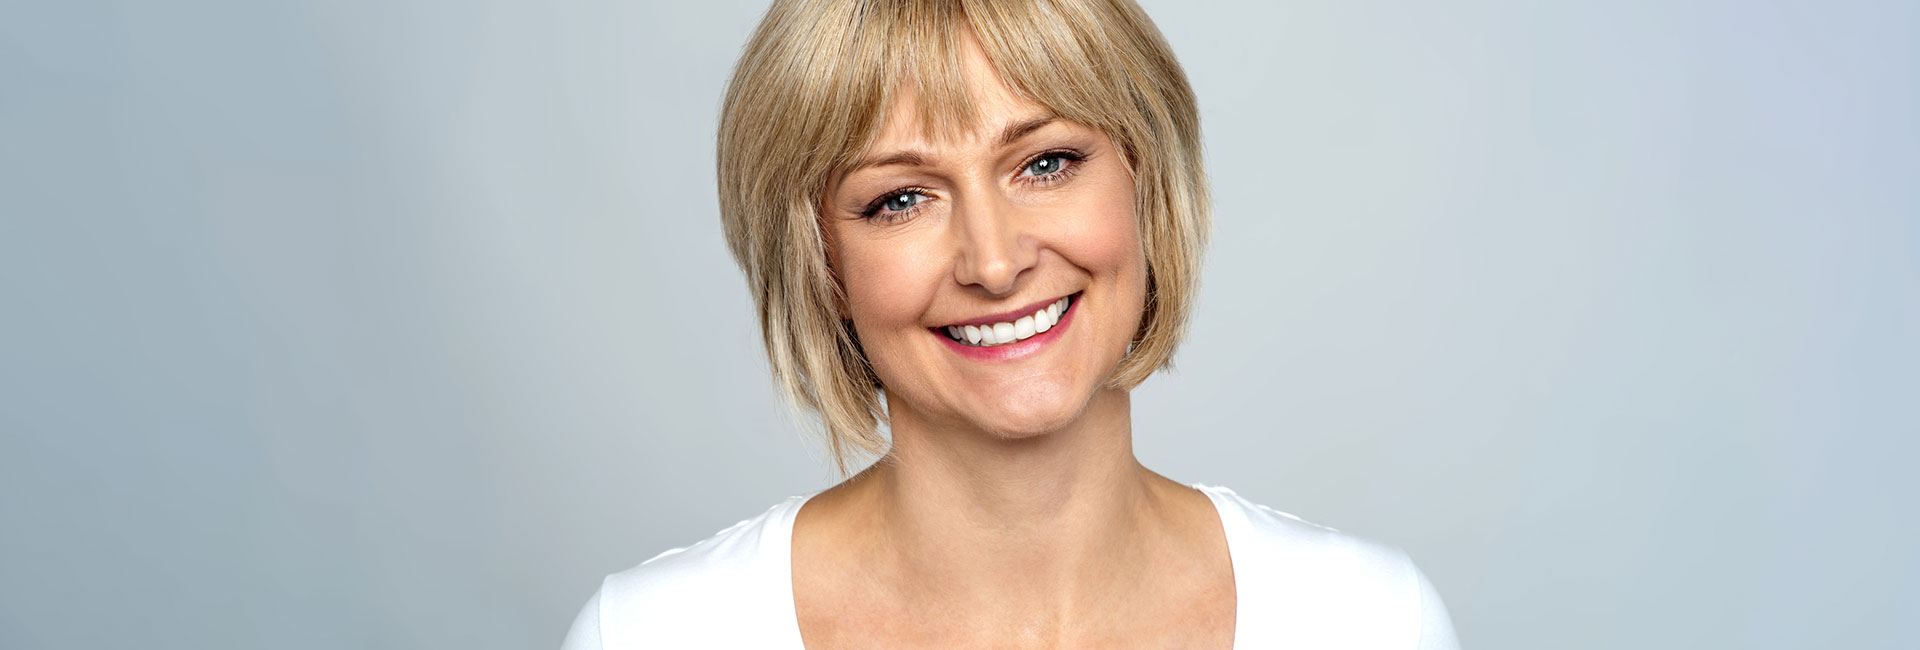 Portrait of a smiling middle aged caucasian woman